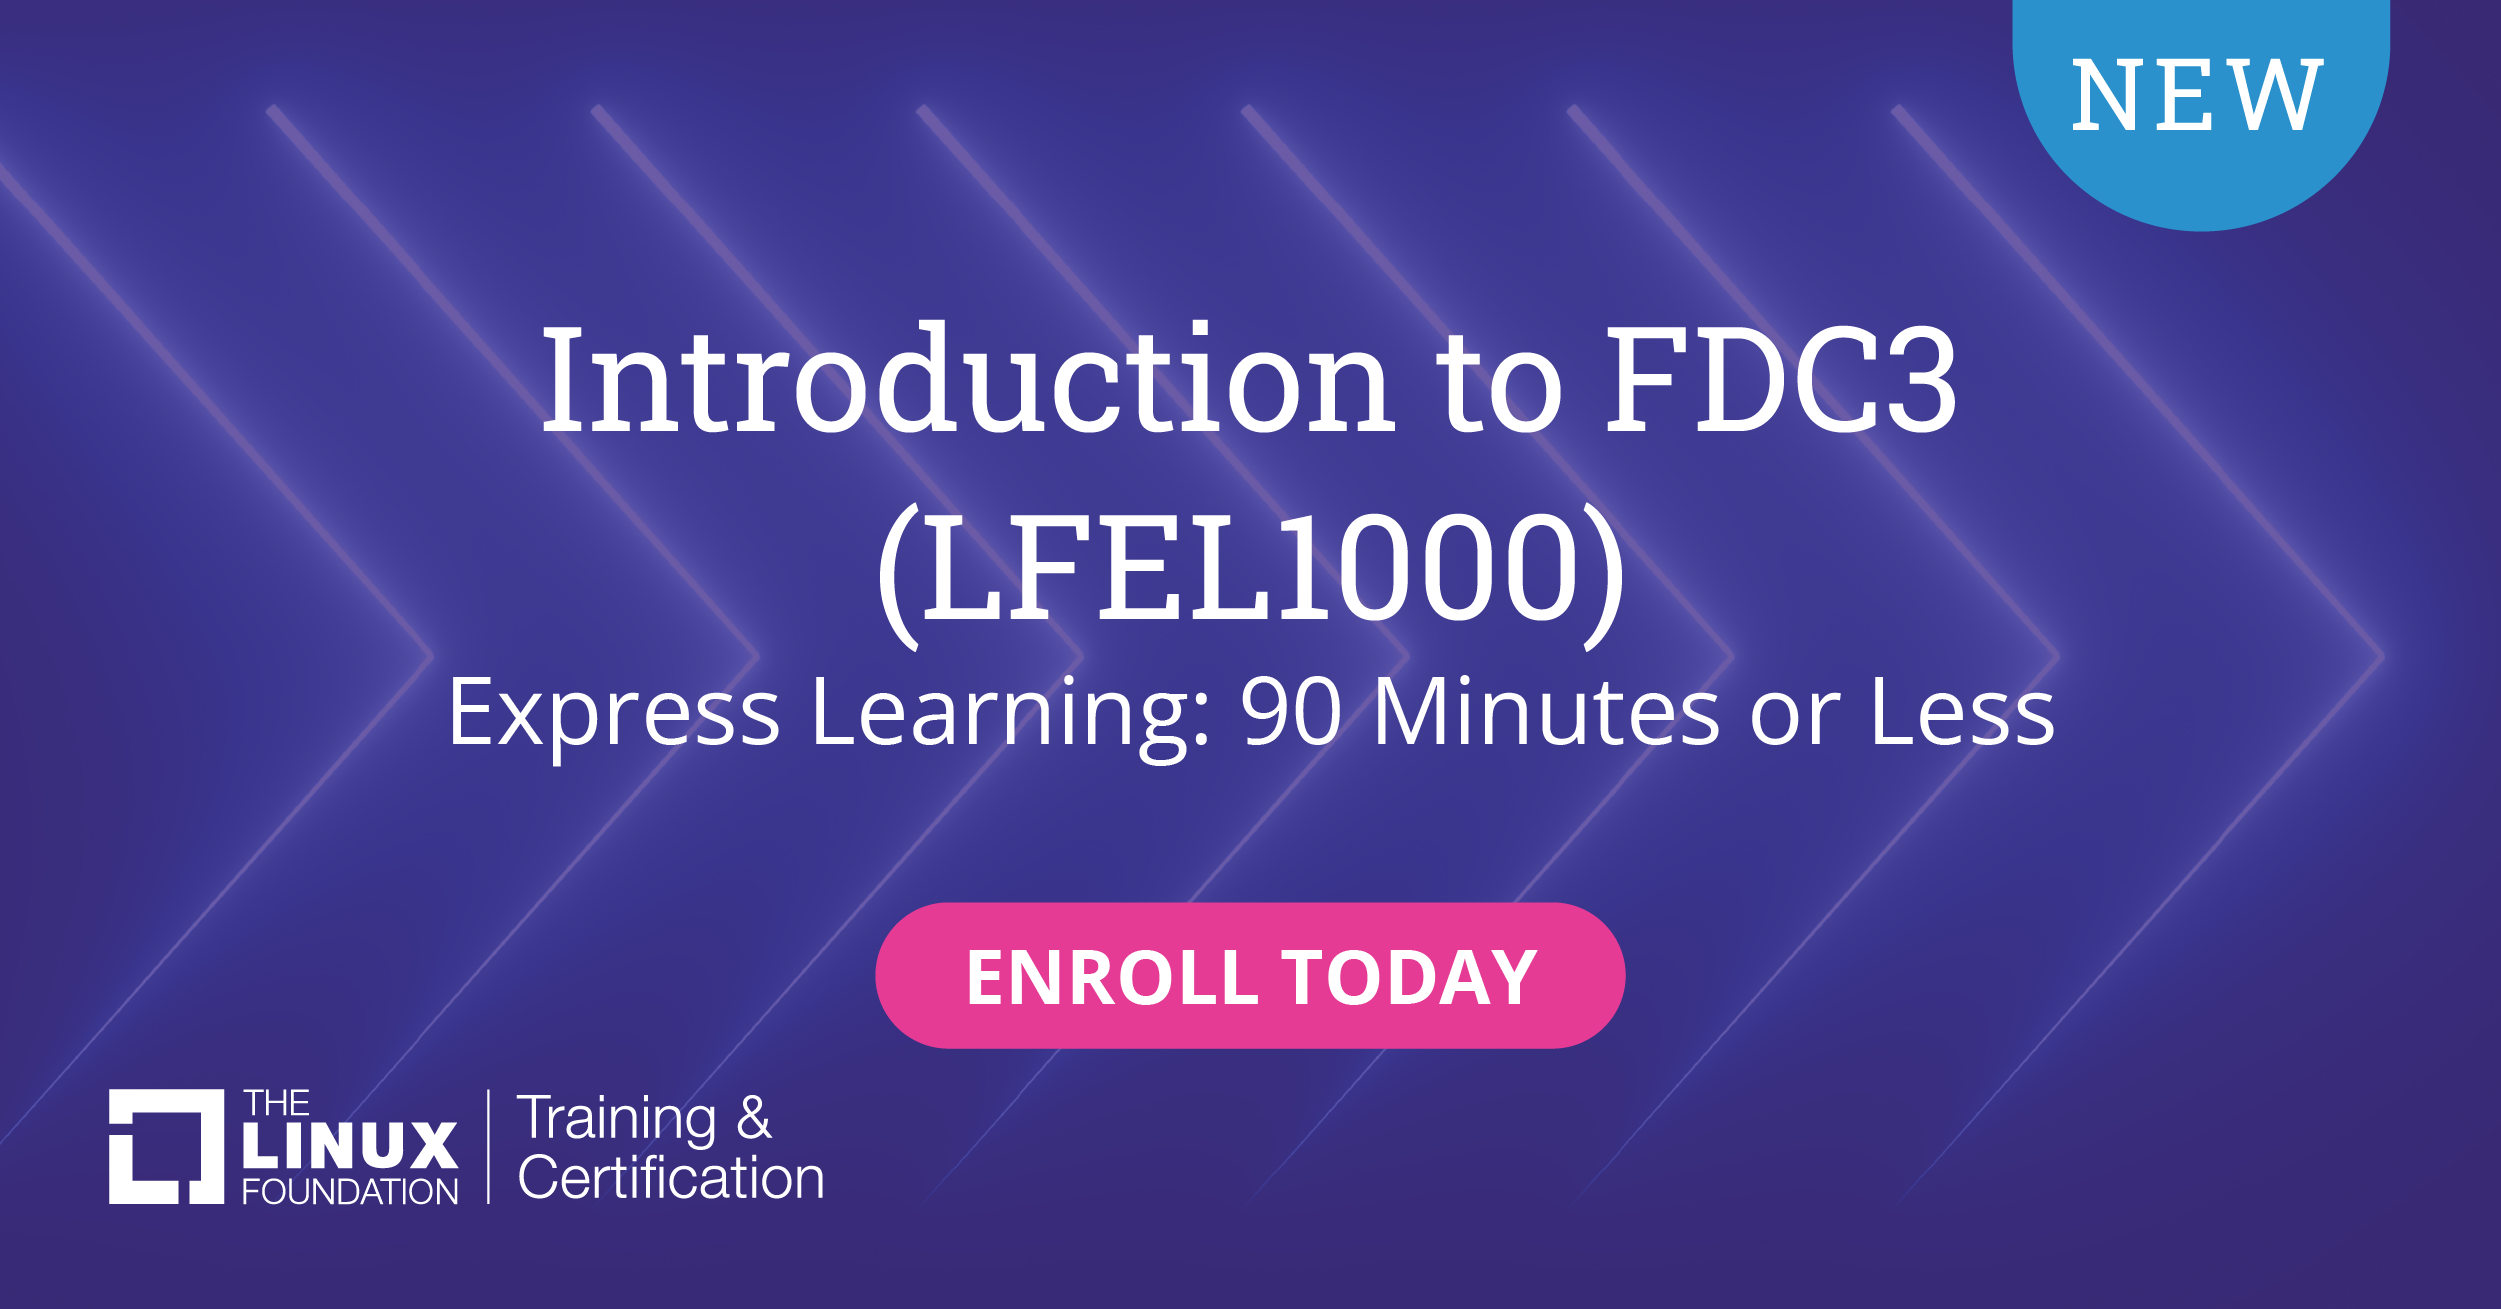 Just Launched: Introduction to FDC3 (LFEL1000)